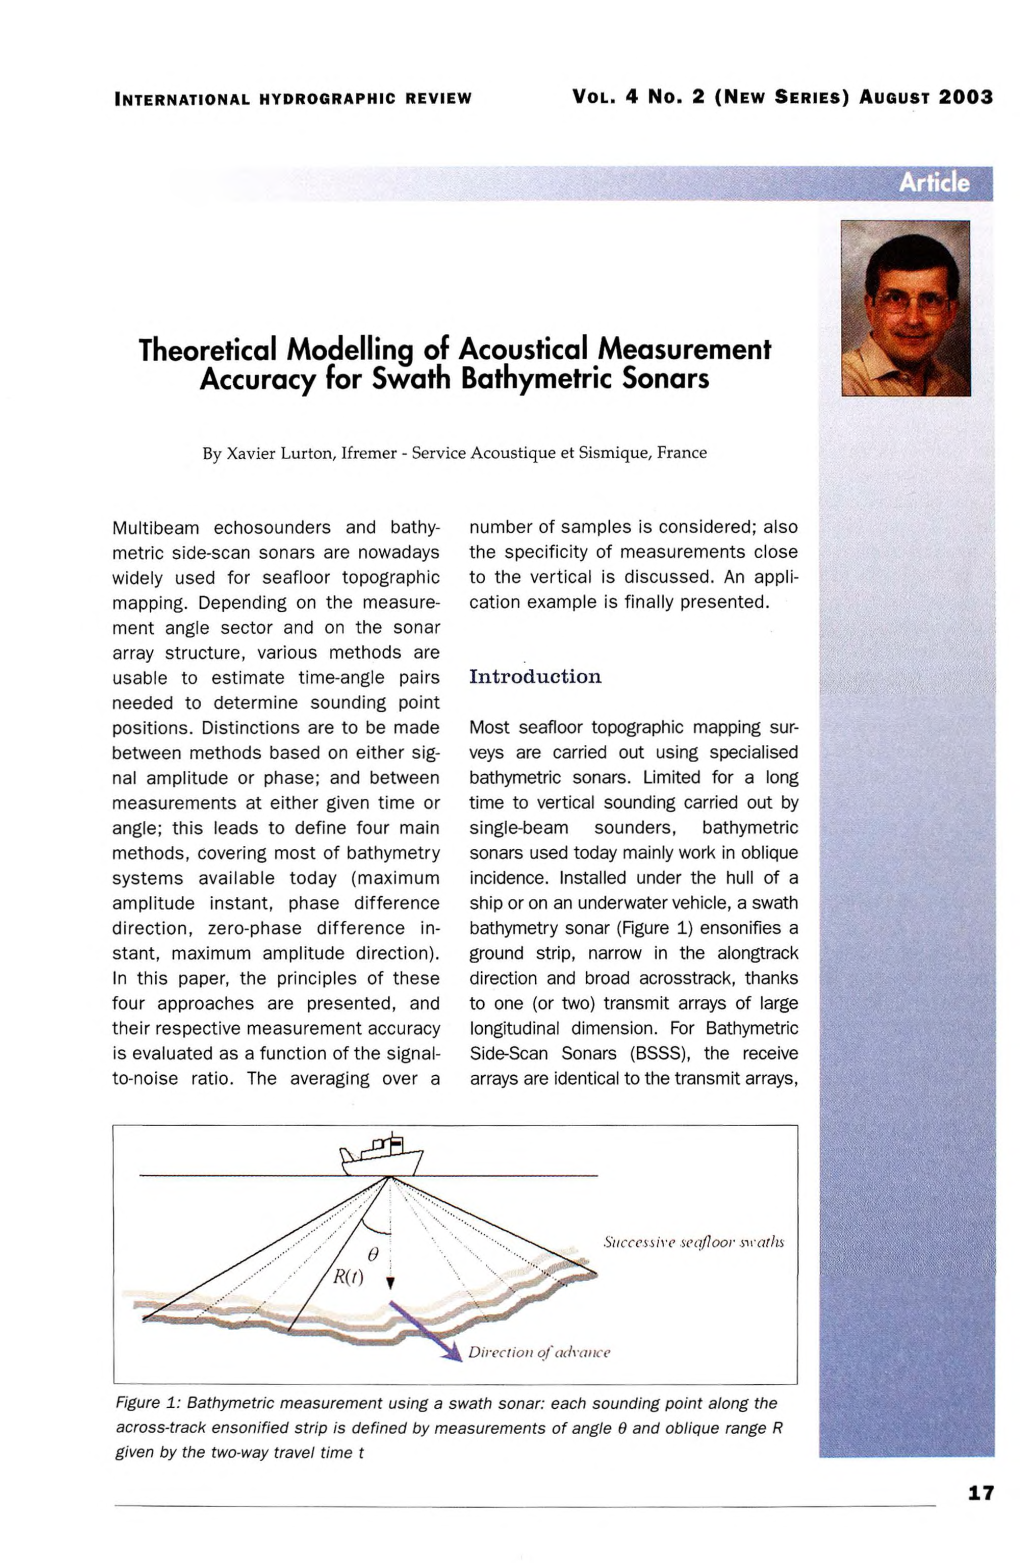 Theoretical Modelling of Acoustical Measurement Accuracy for Swath Bathymetric Sonars